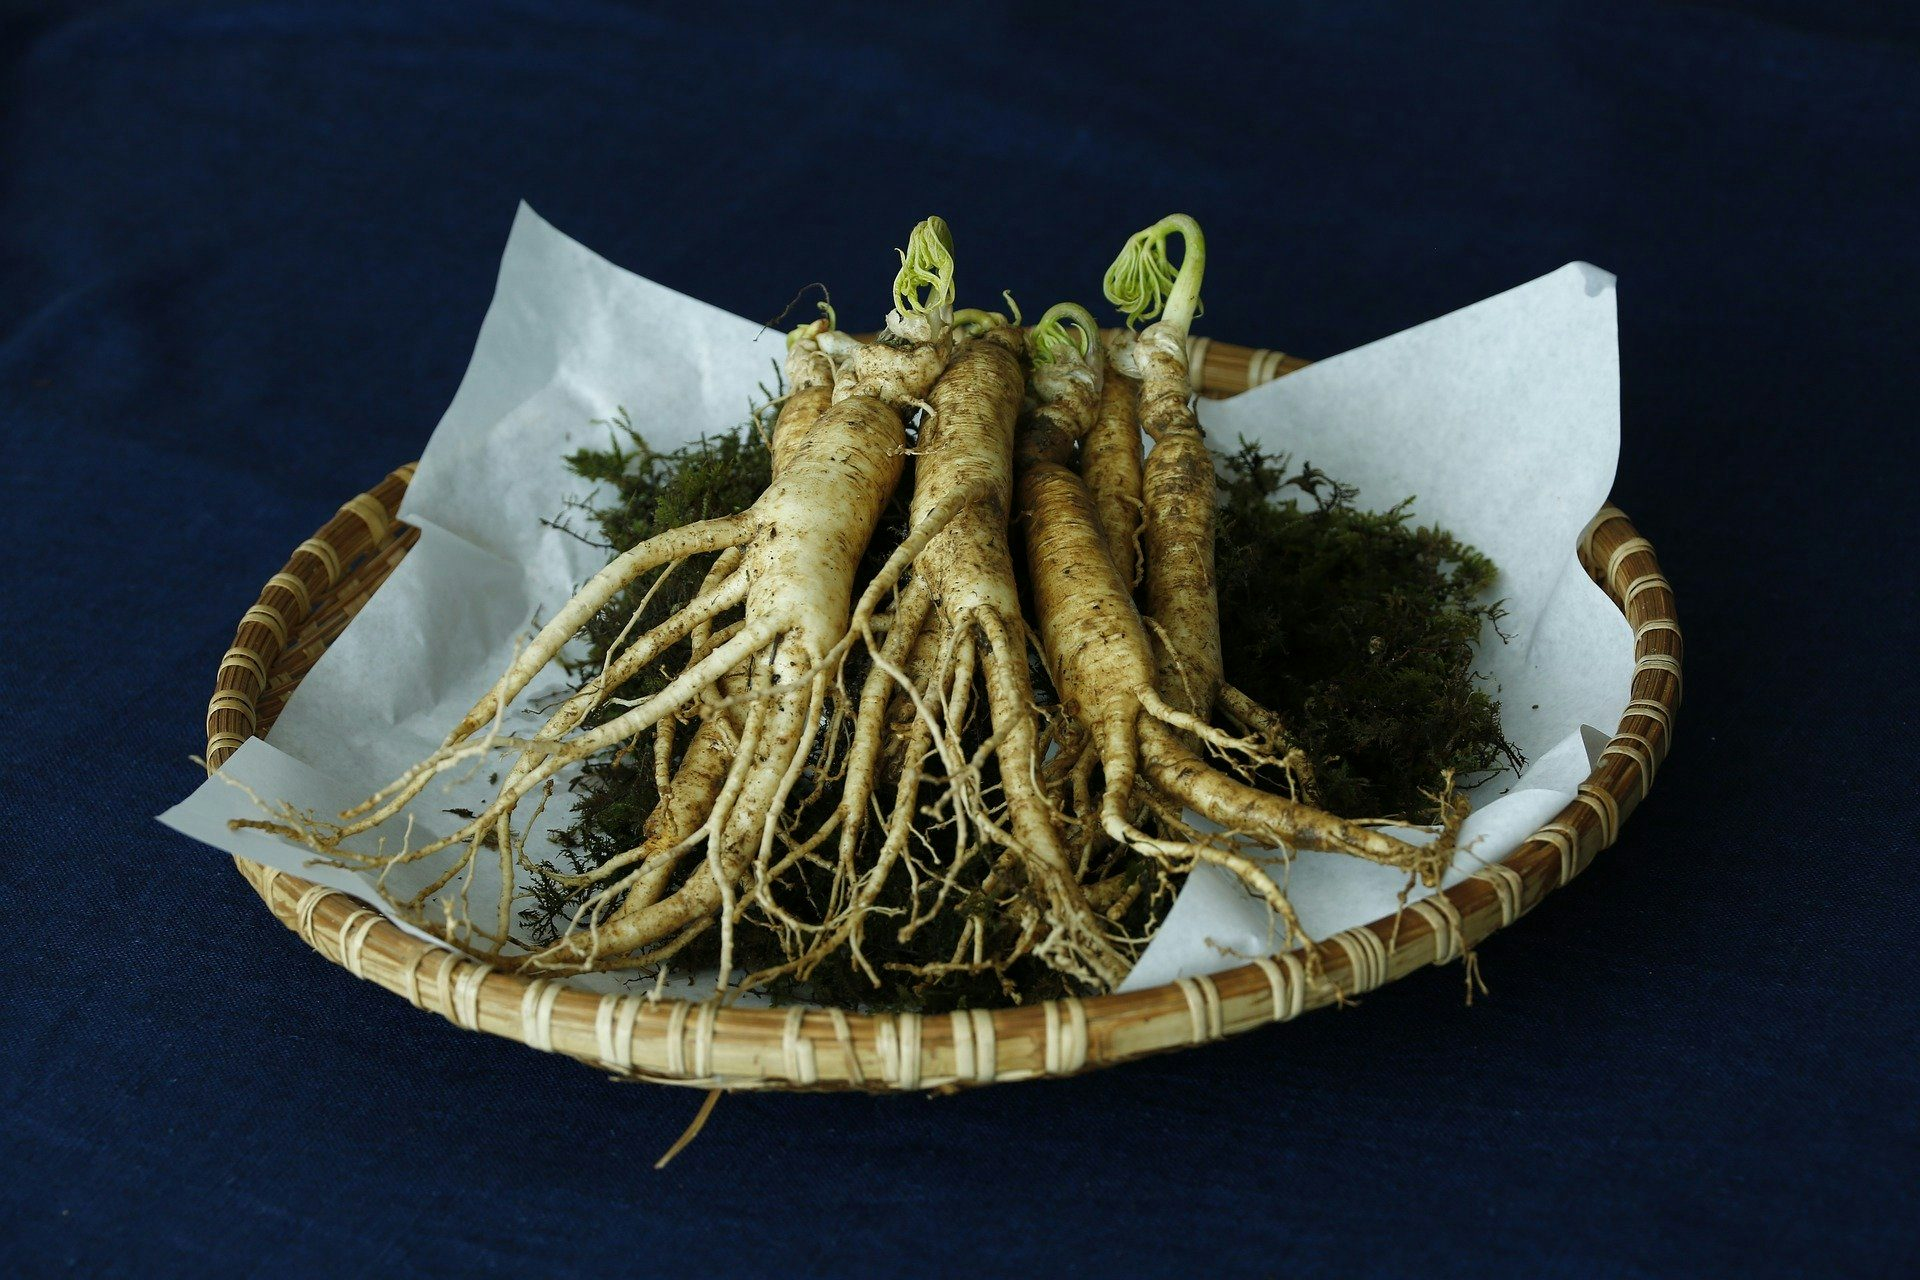 Let's make ginseng extract